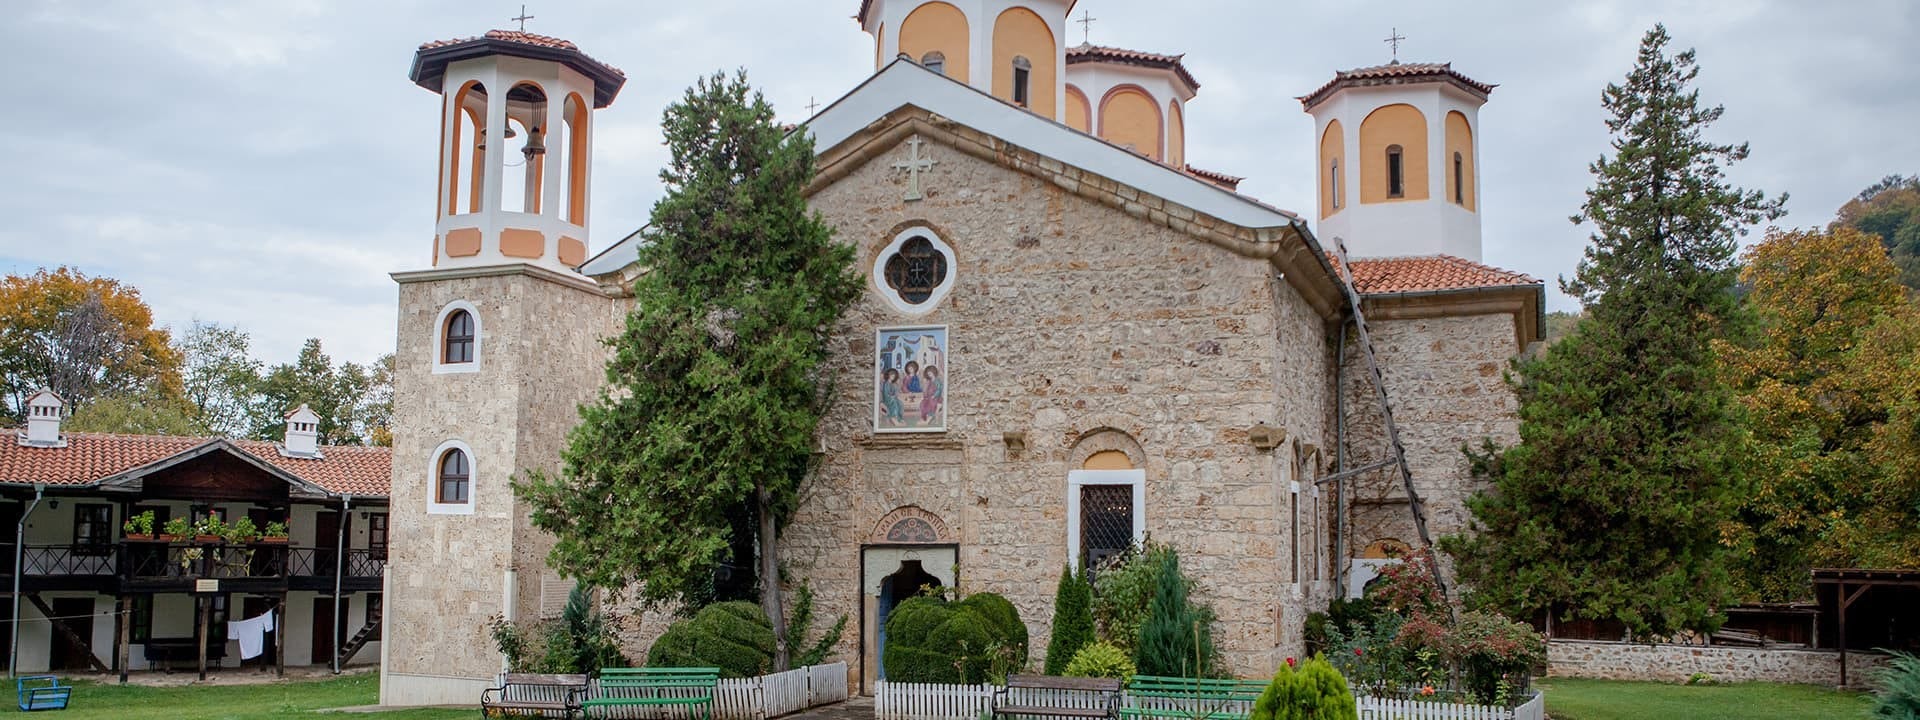 The monastery restored with the preservation of its authentic architecture